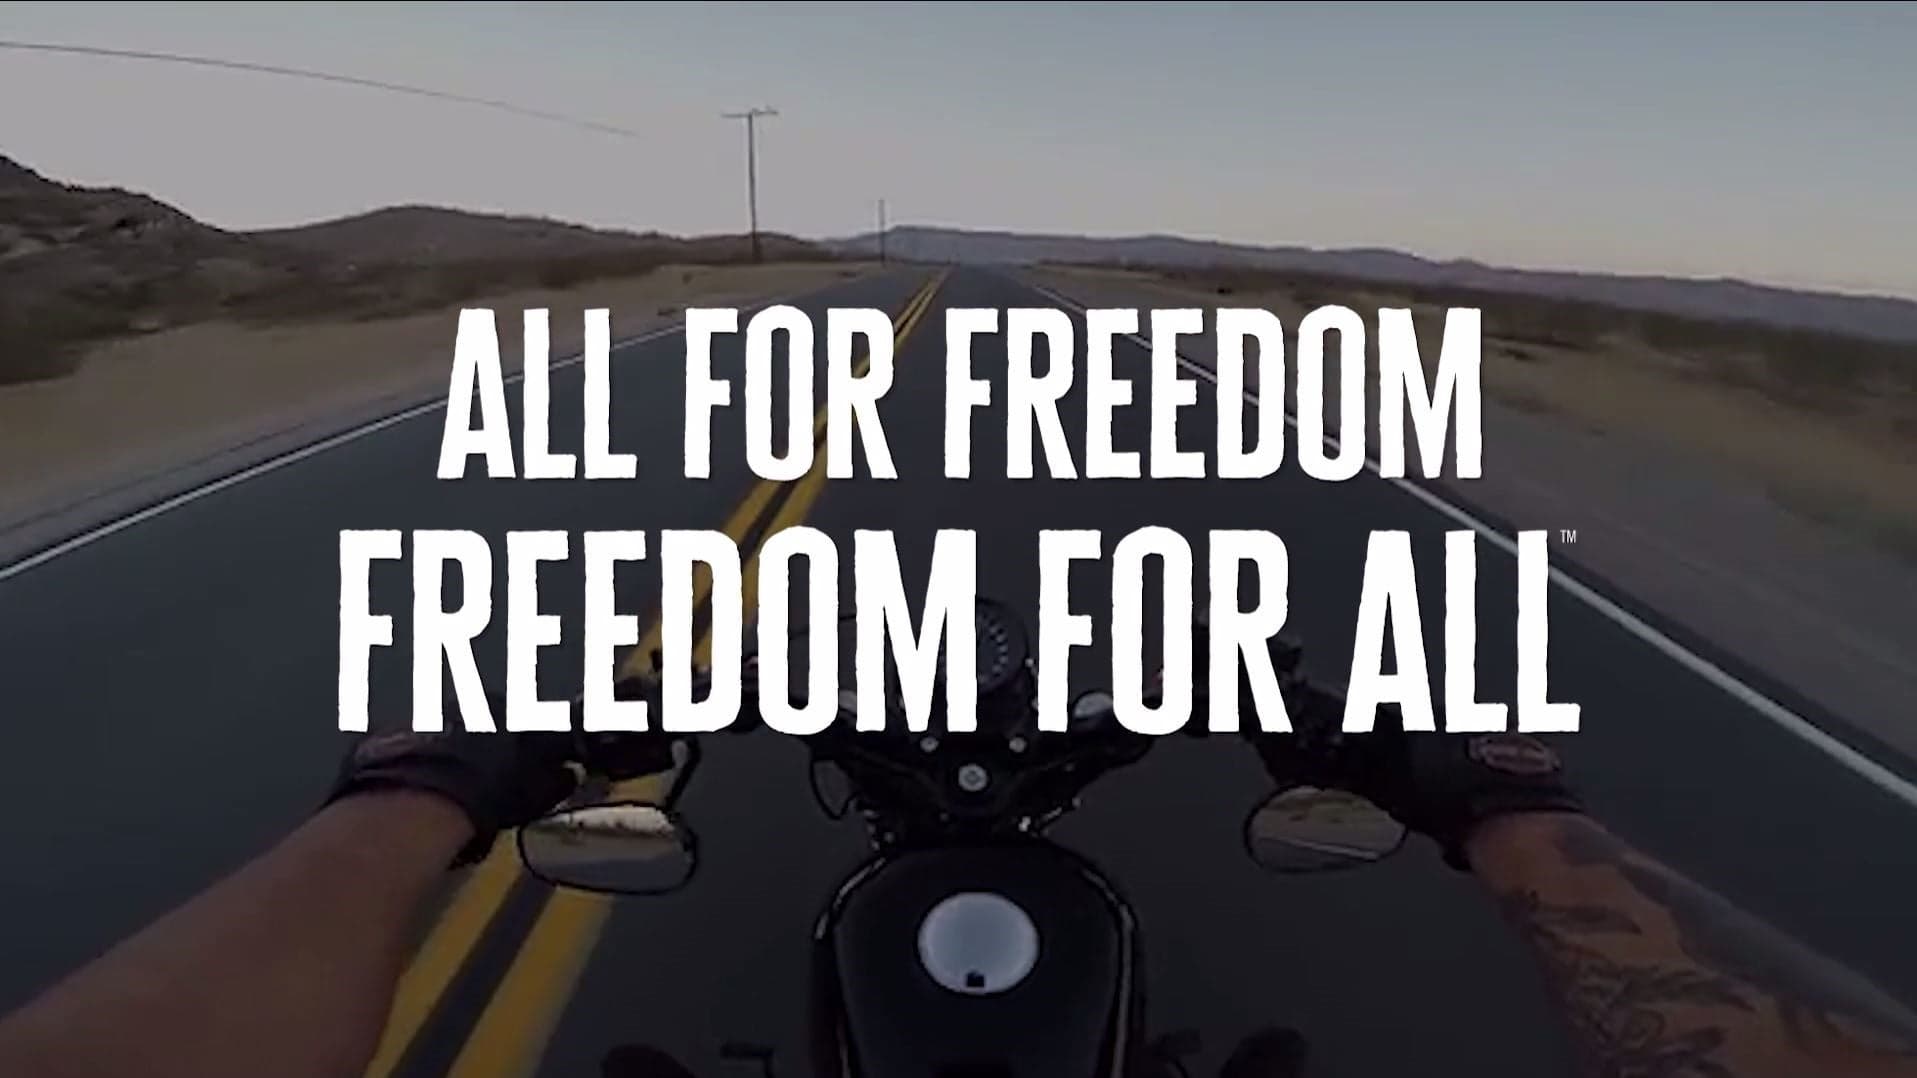 Harley-Davidson’s New Campaign Spotlights Freedom By Motorcycle